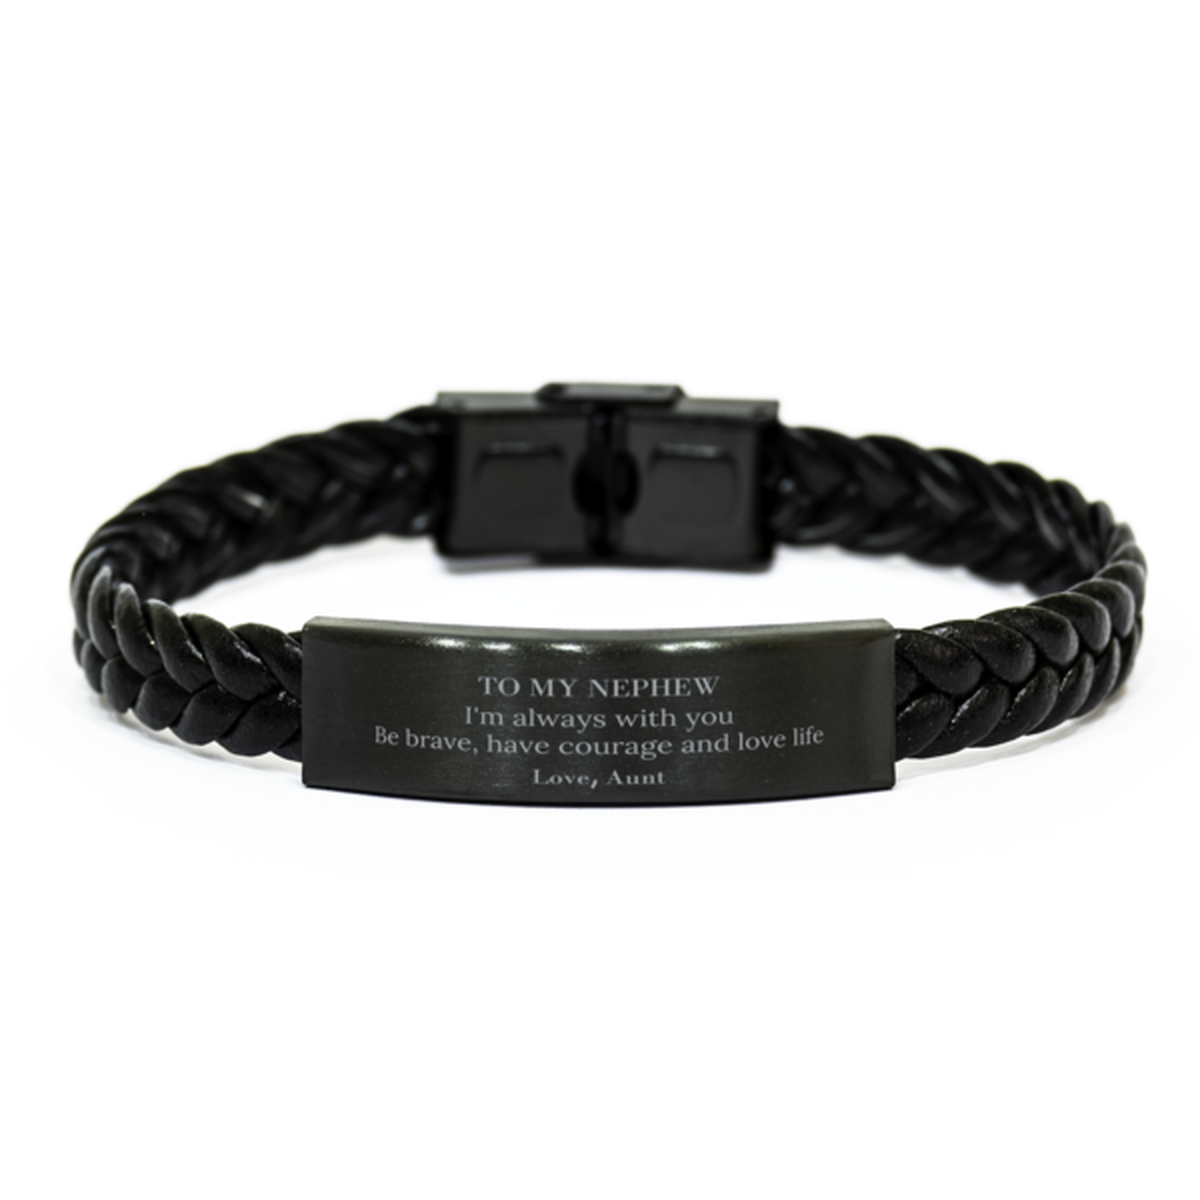 To My Nephew Gifts from Aunt, Unique Braided Leather Bracelet Inspirational Christmas Birthday Graduation Gifts for Nephew I'm always with you. Be brave, have courage and love life. Love, Aunt